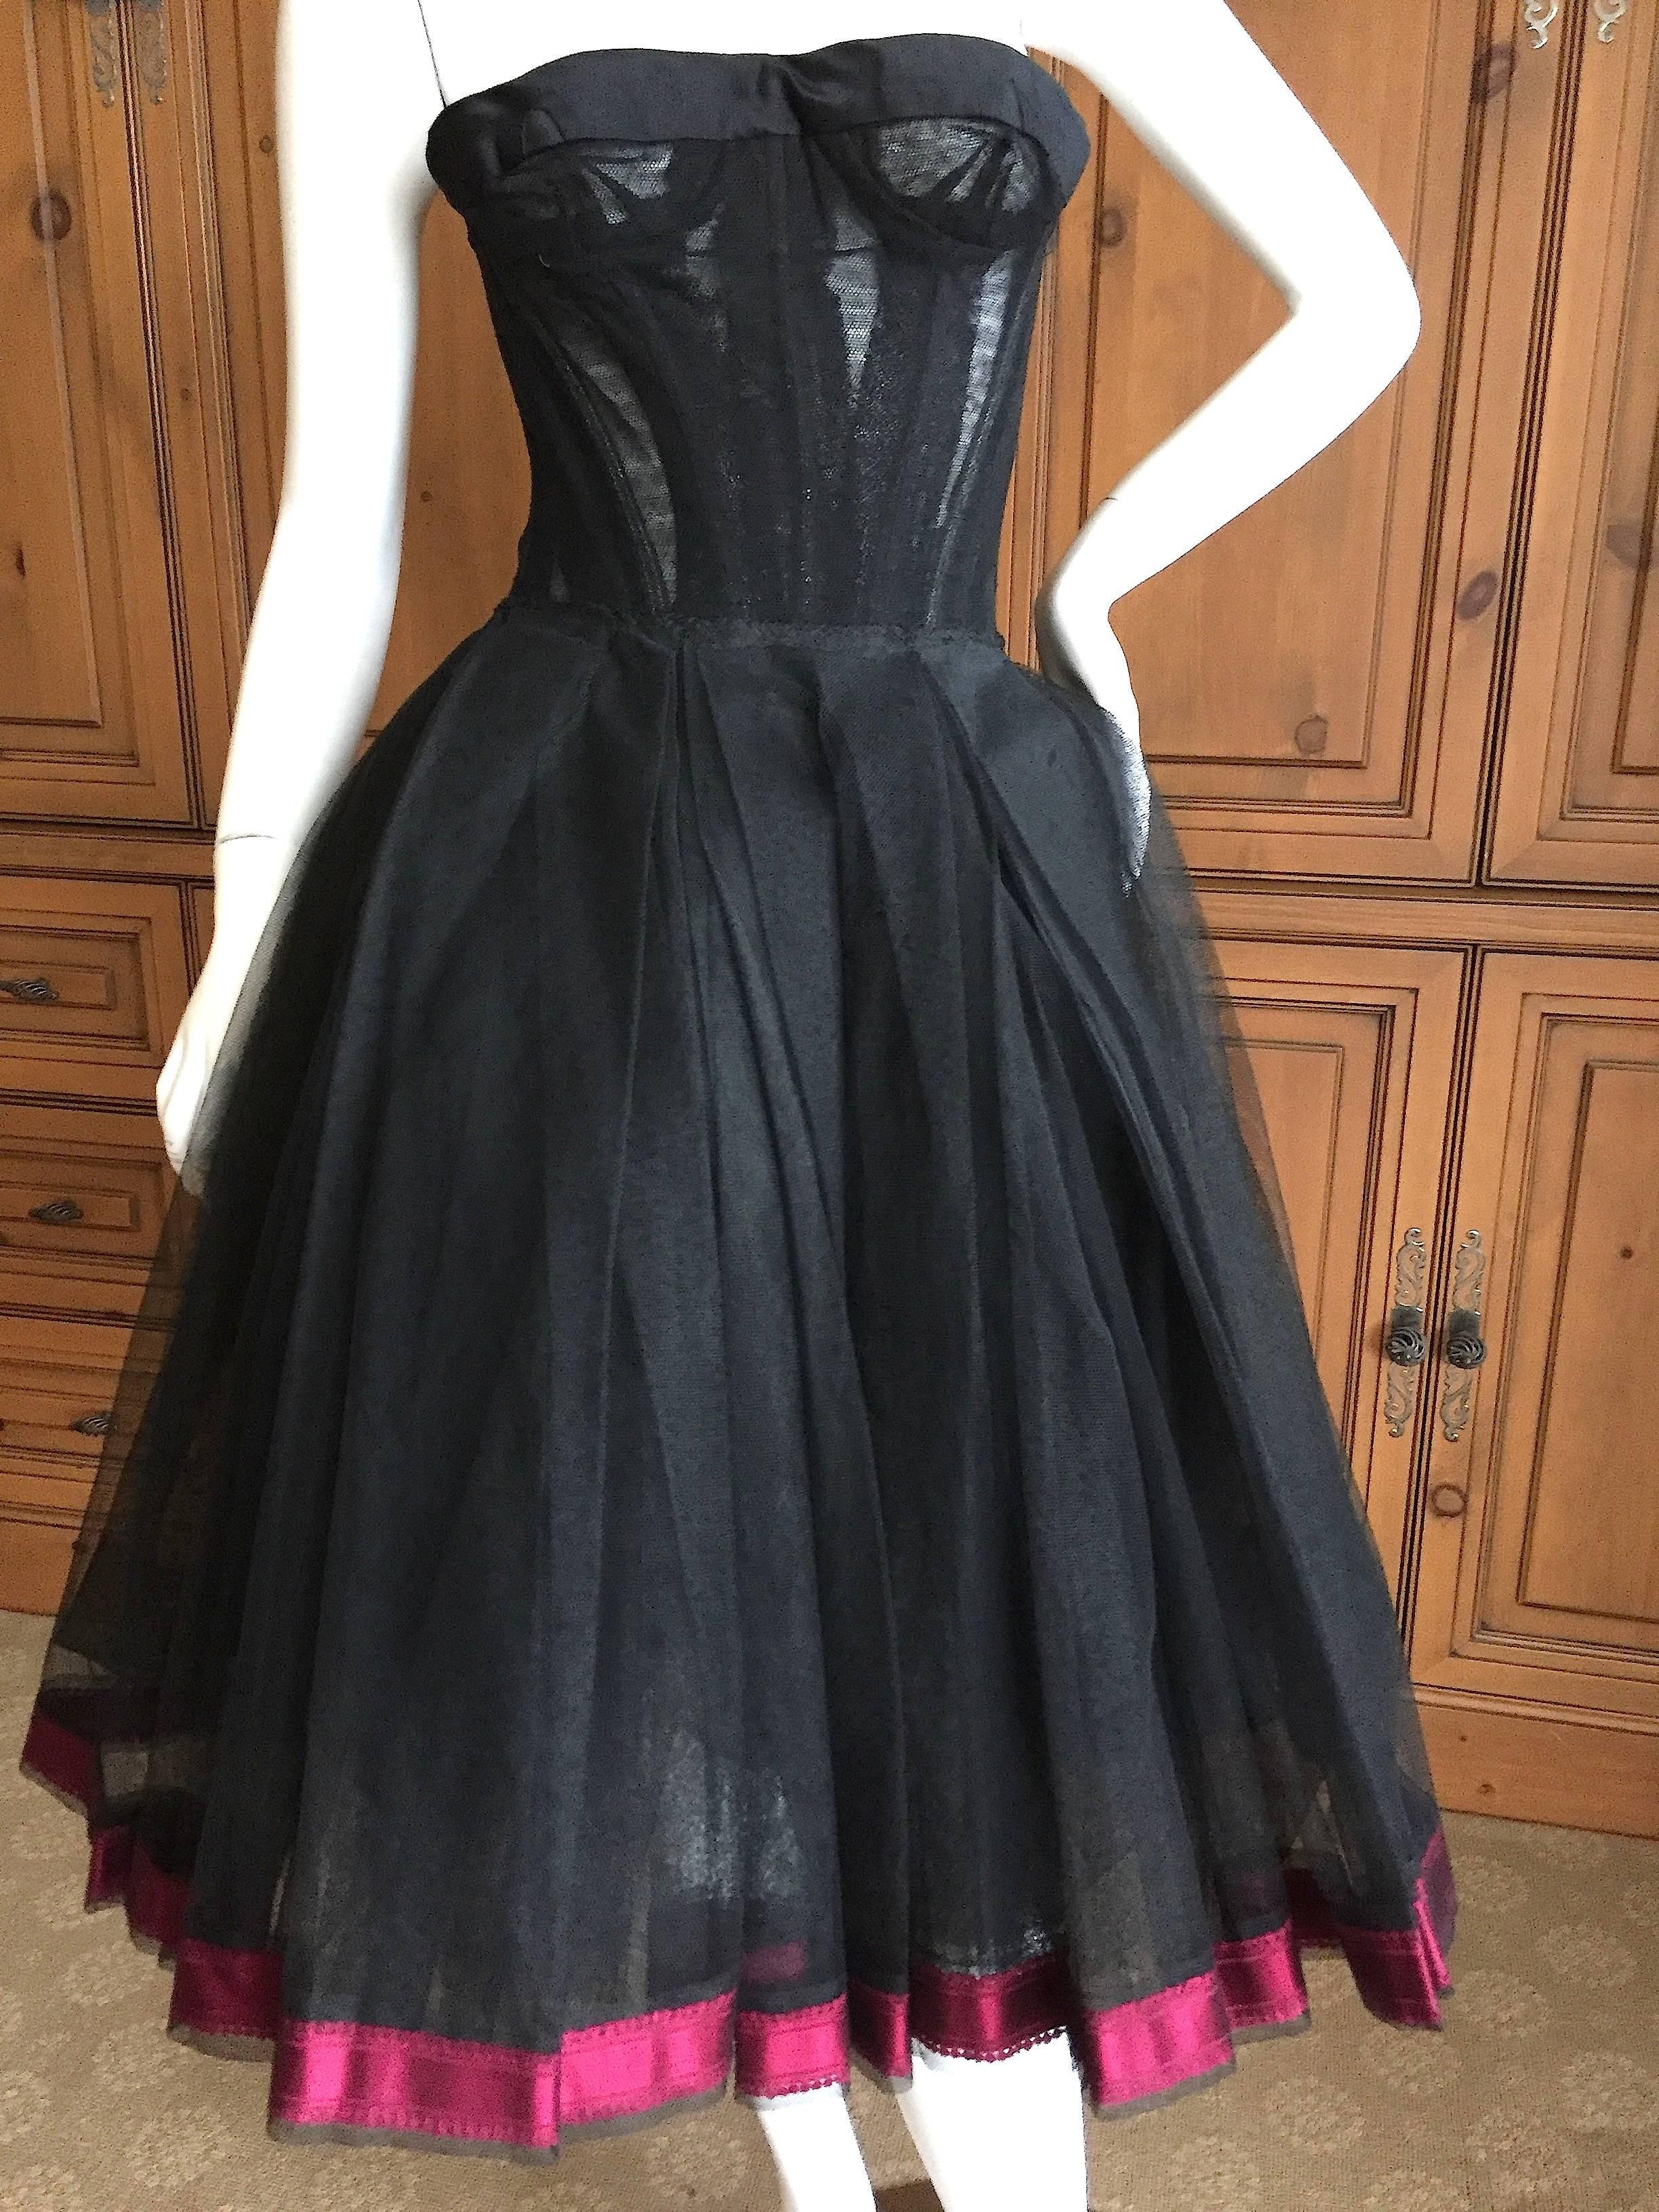 Black Christian DIor Attr A' 1954 Haute Couture Tulle Boned Bustier Under Dress